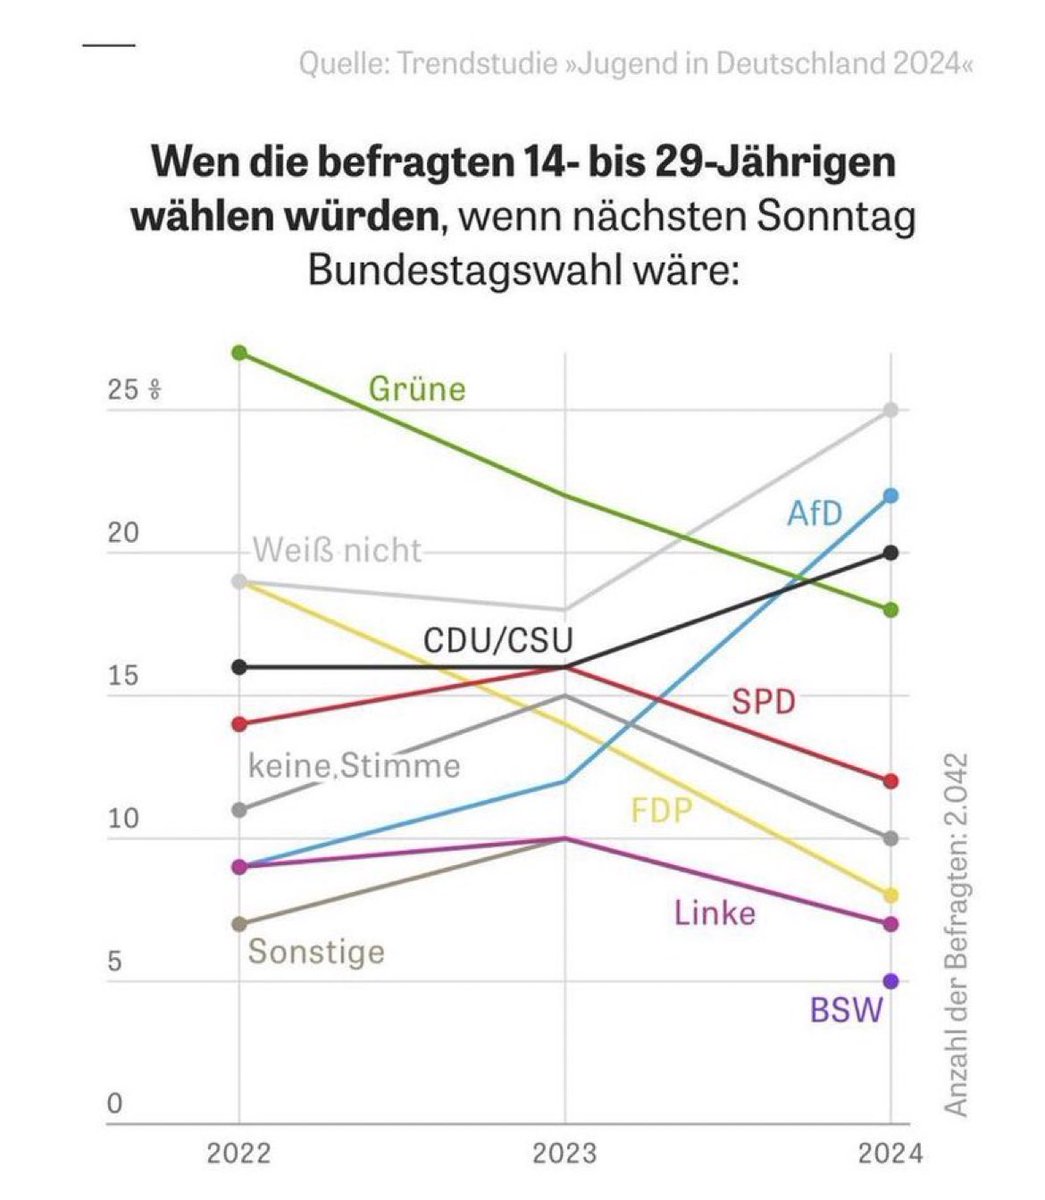 Among 14 to 29 year old Germans, the AfD is now the most popular party. Two takeaways: 1.) Gen Z is moving to the right. 2.) The younger generation is realizing that mass immigration is a threat to their future.